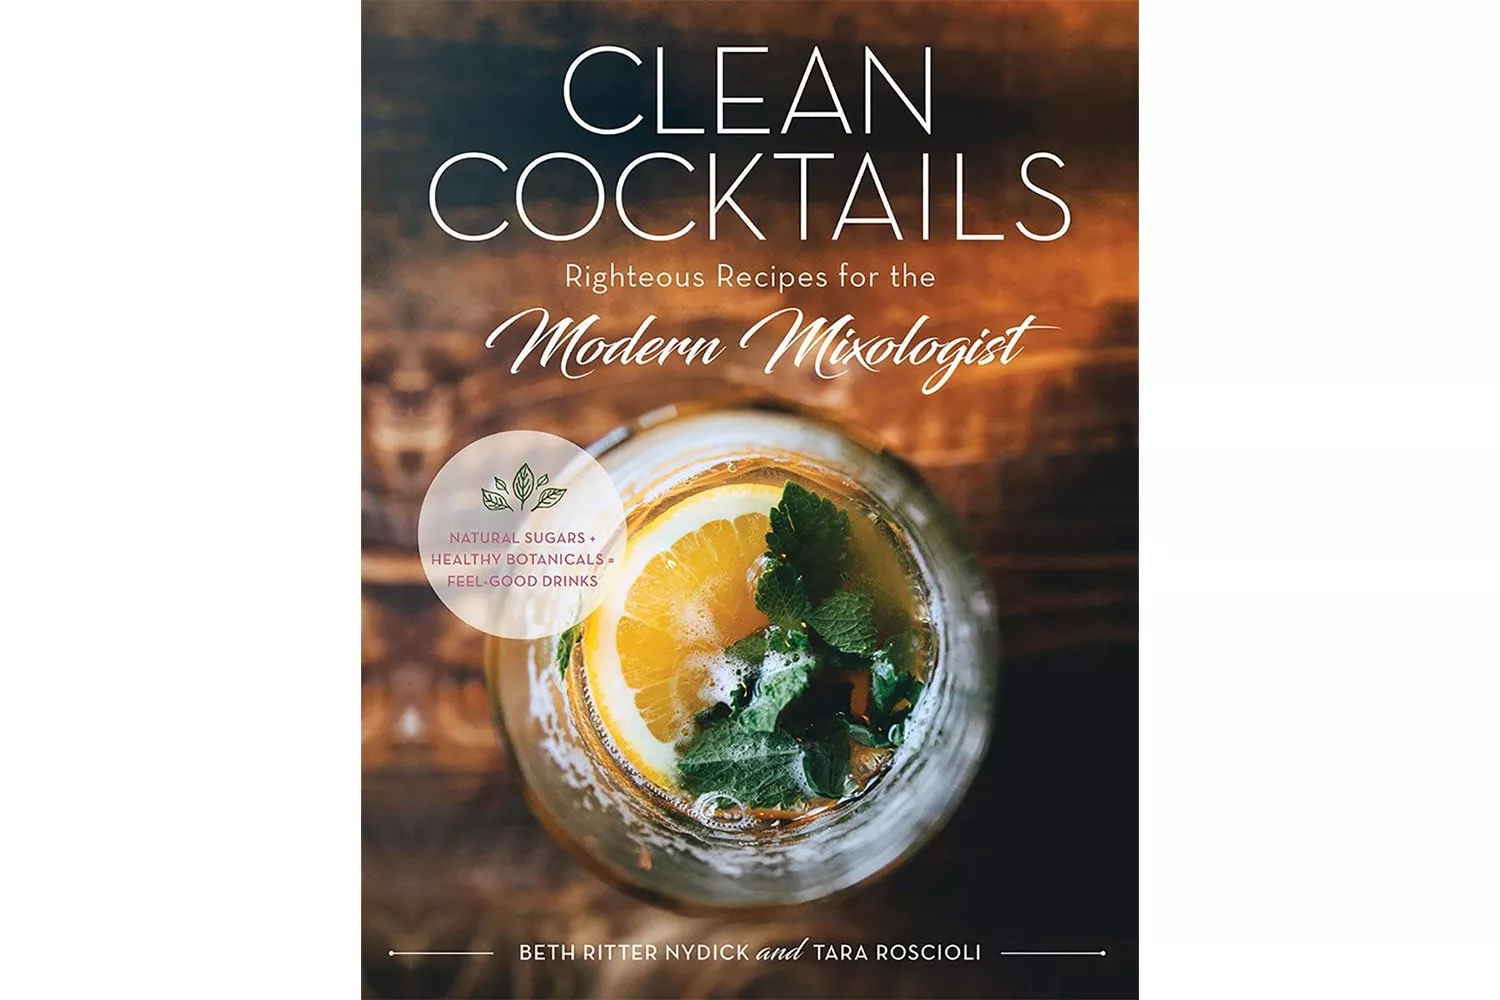 Clean Cocktails: Righteous Recipes for the Modernist Mixologist